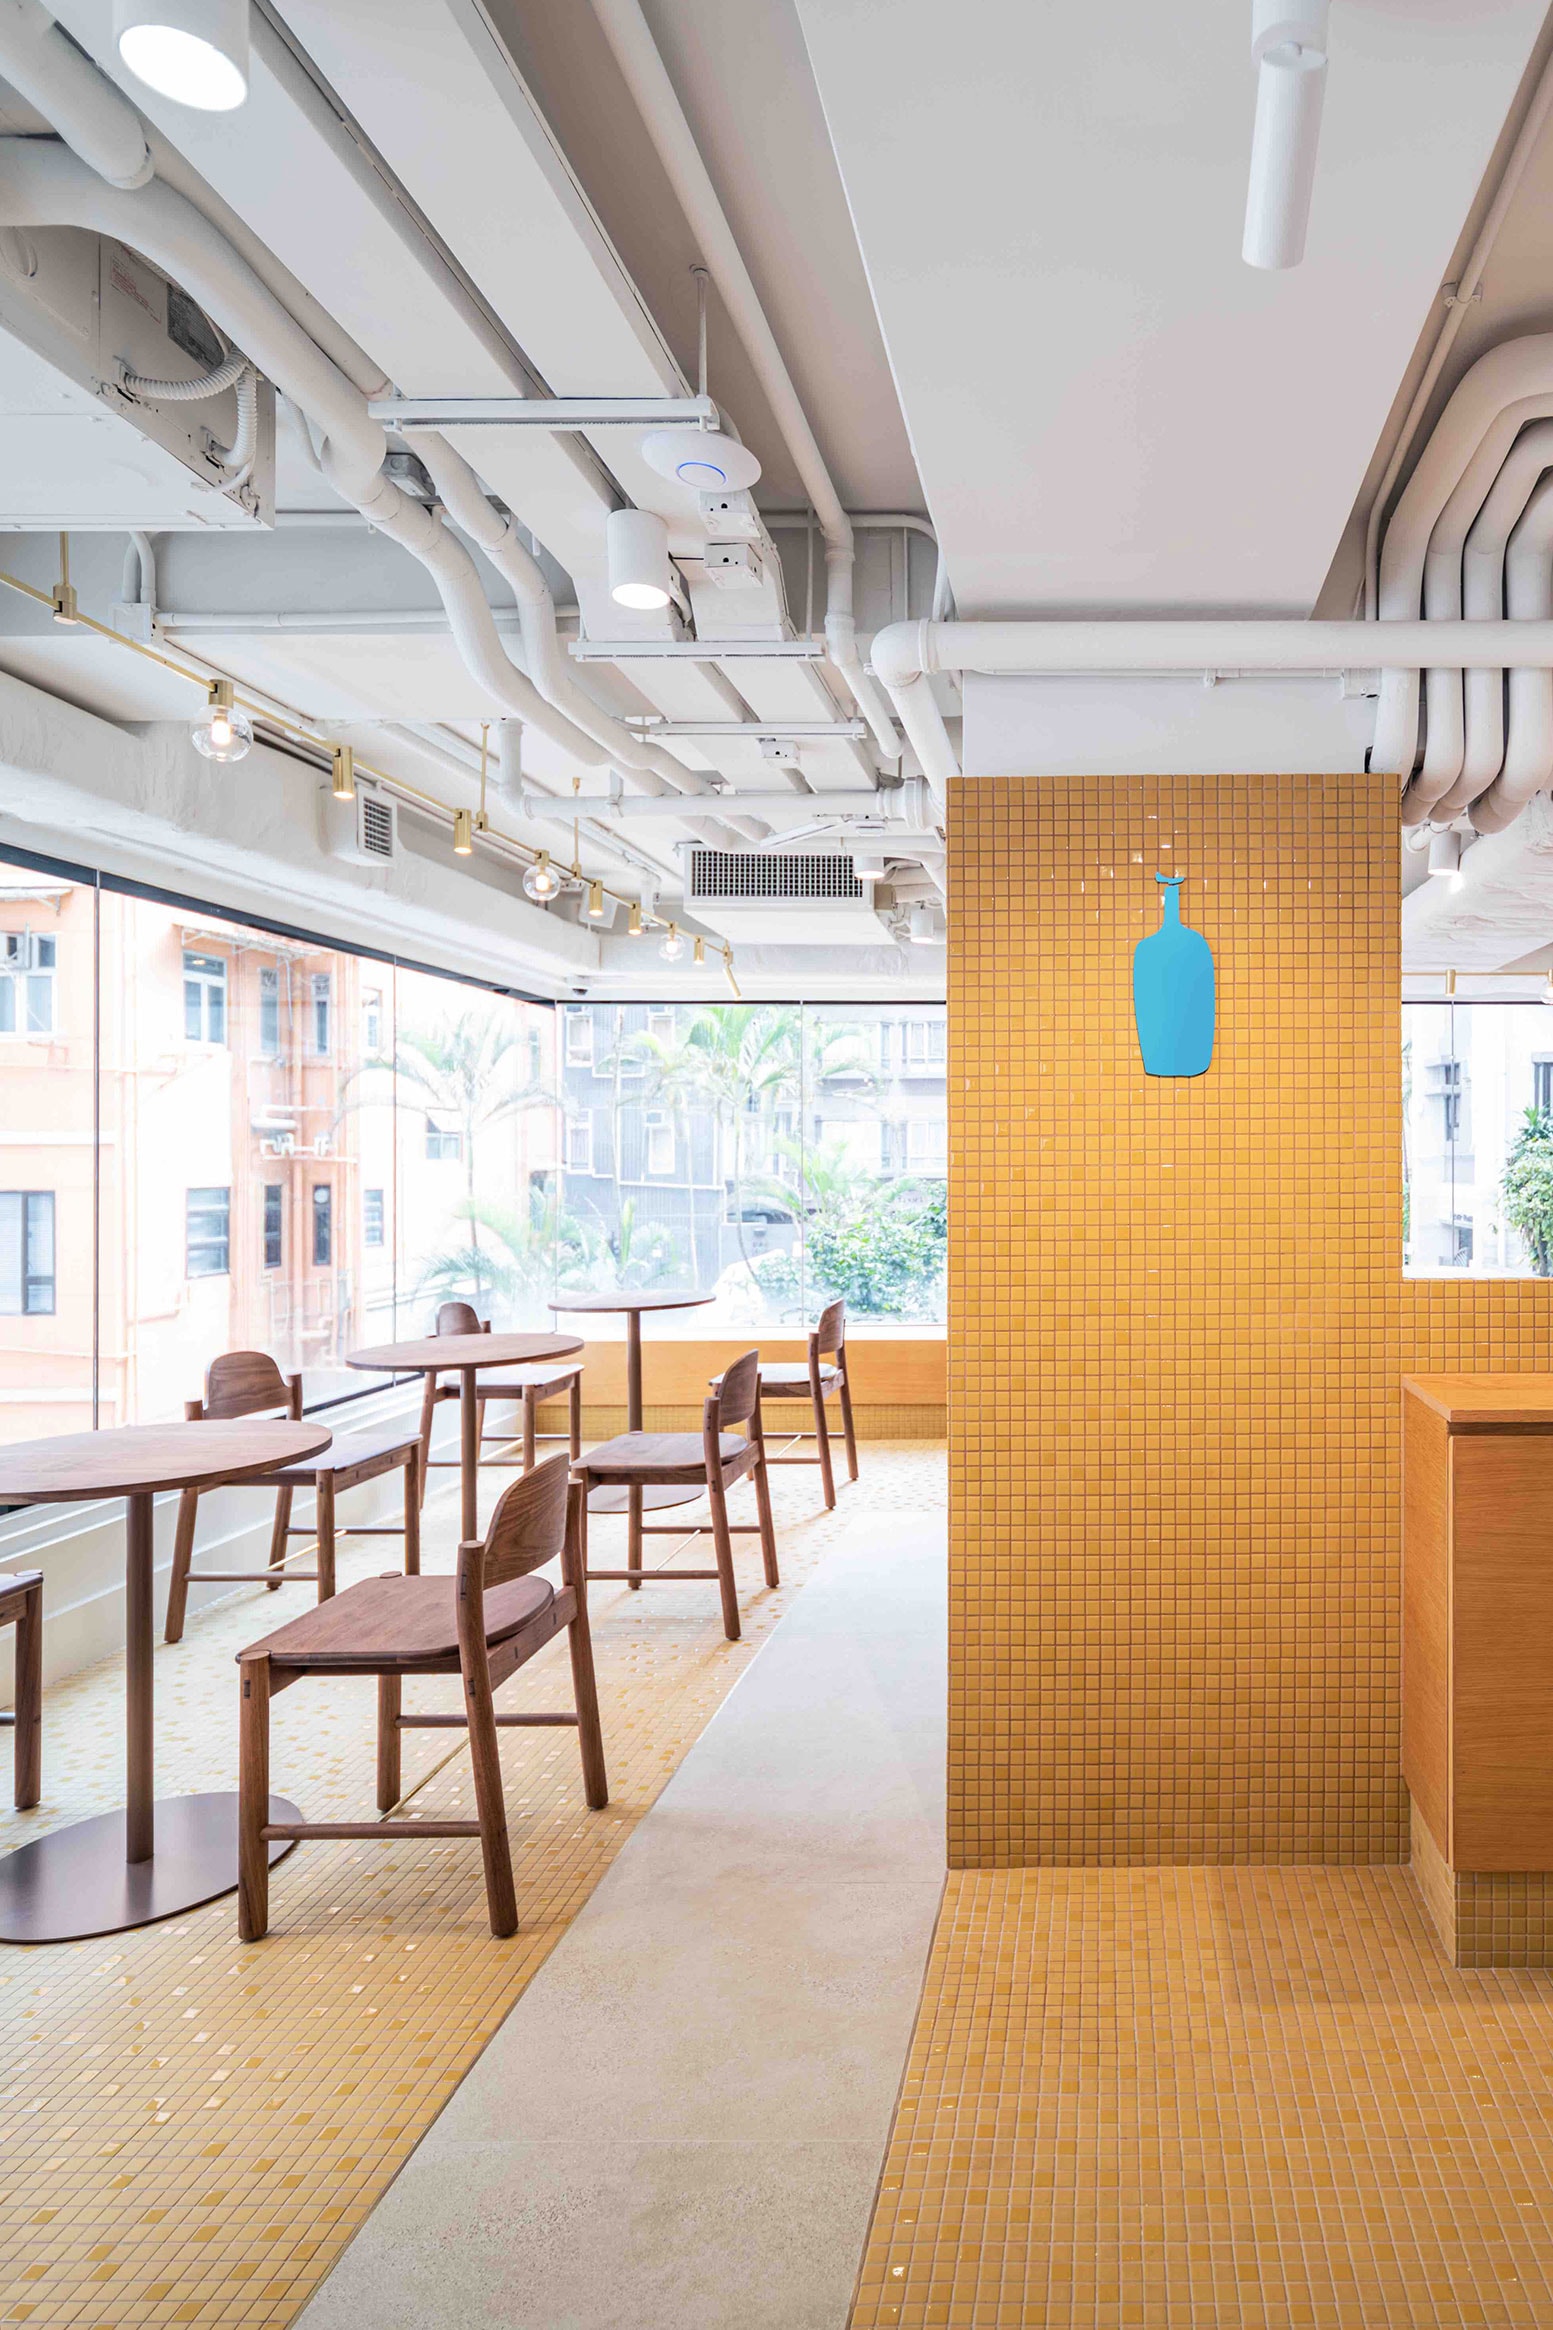 Blue Bottle Coffee wrkshp St. Francis Street, Wanchai  Hong Kong Opening Brunch cafe coffee Architecture